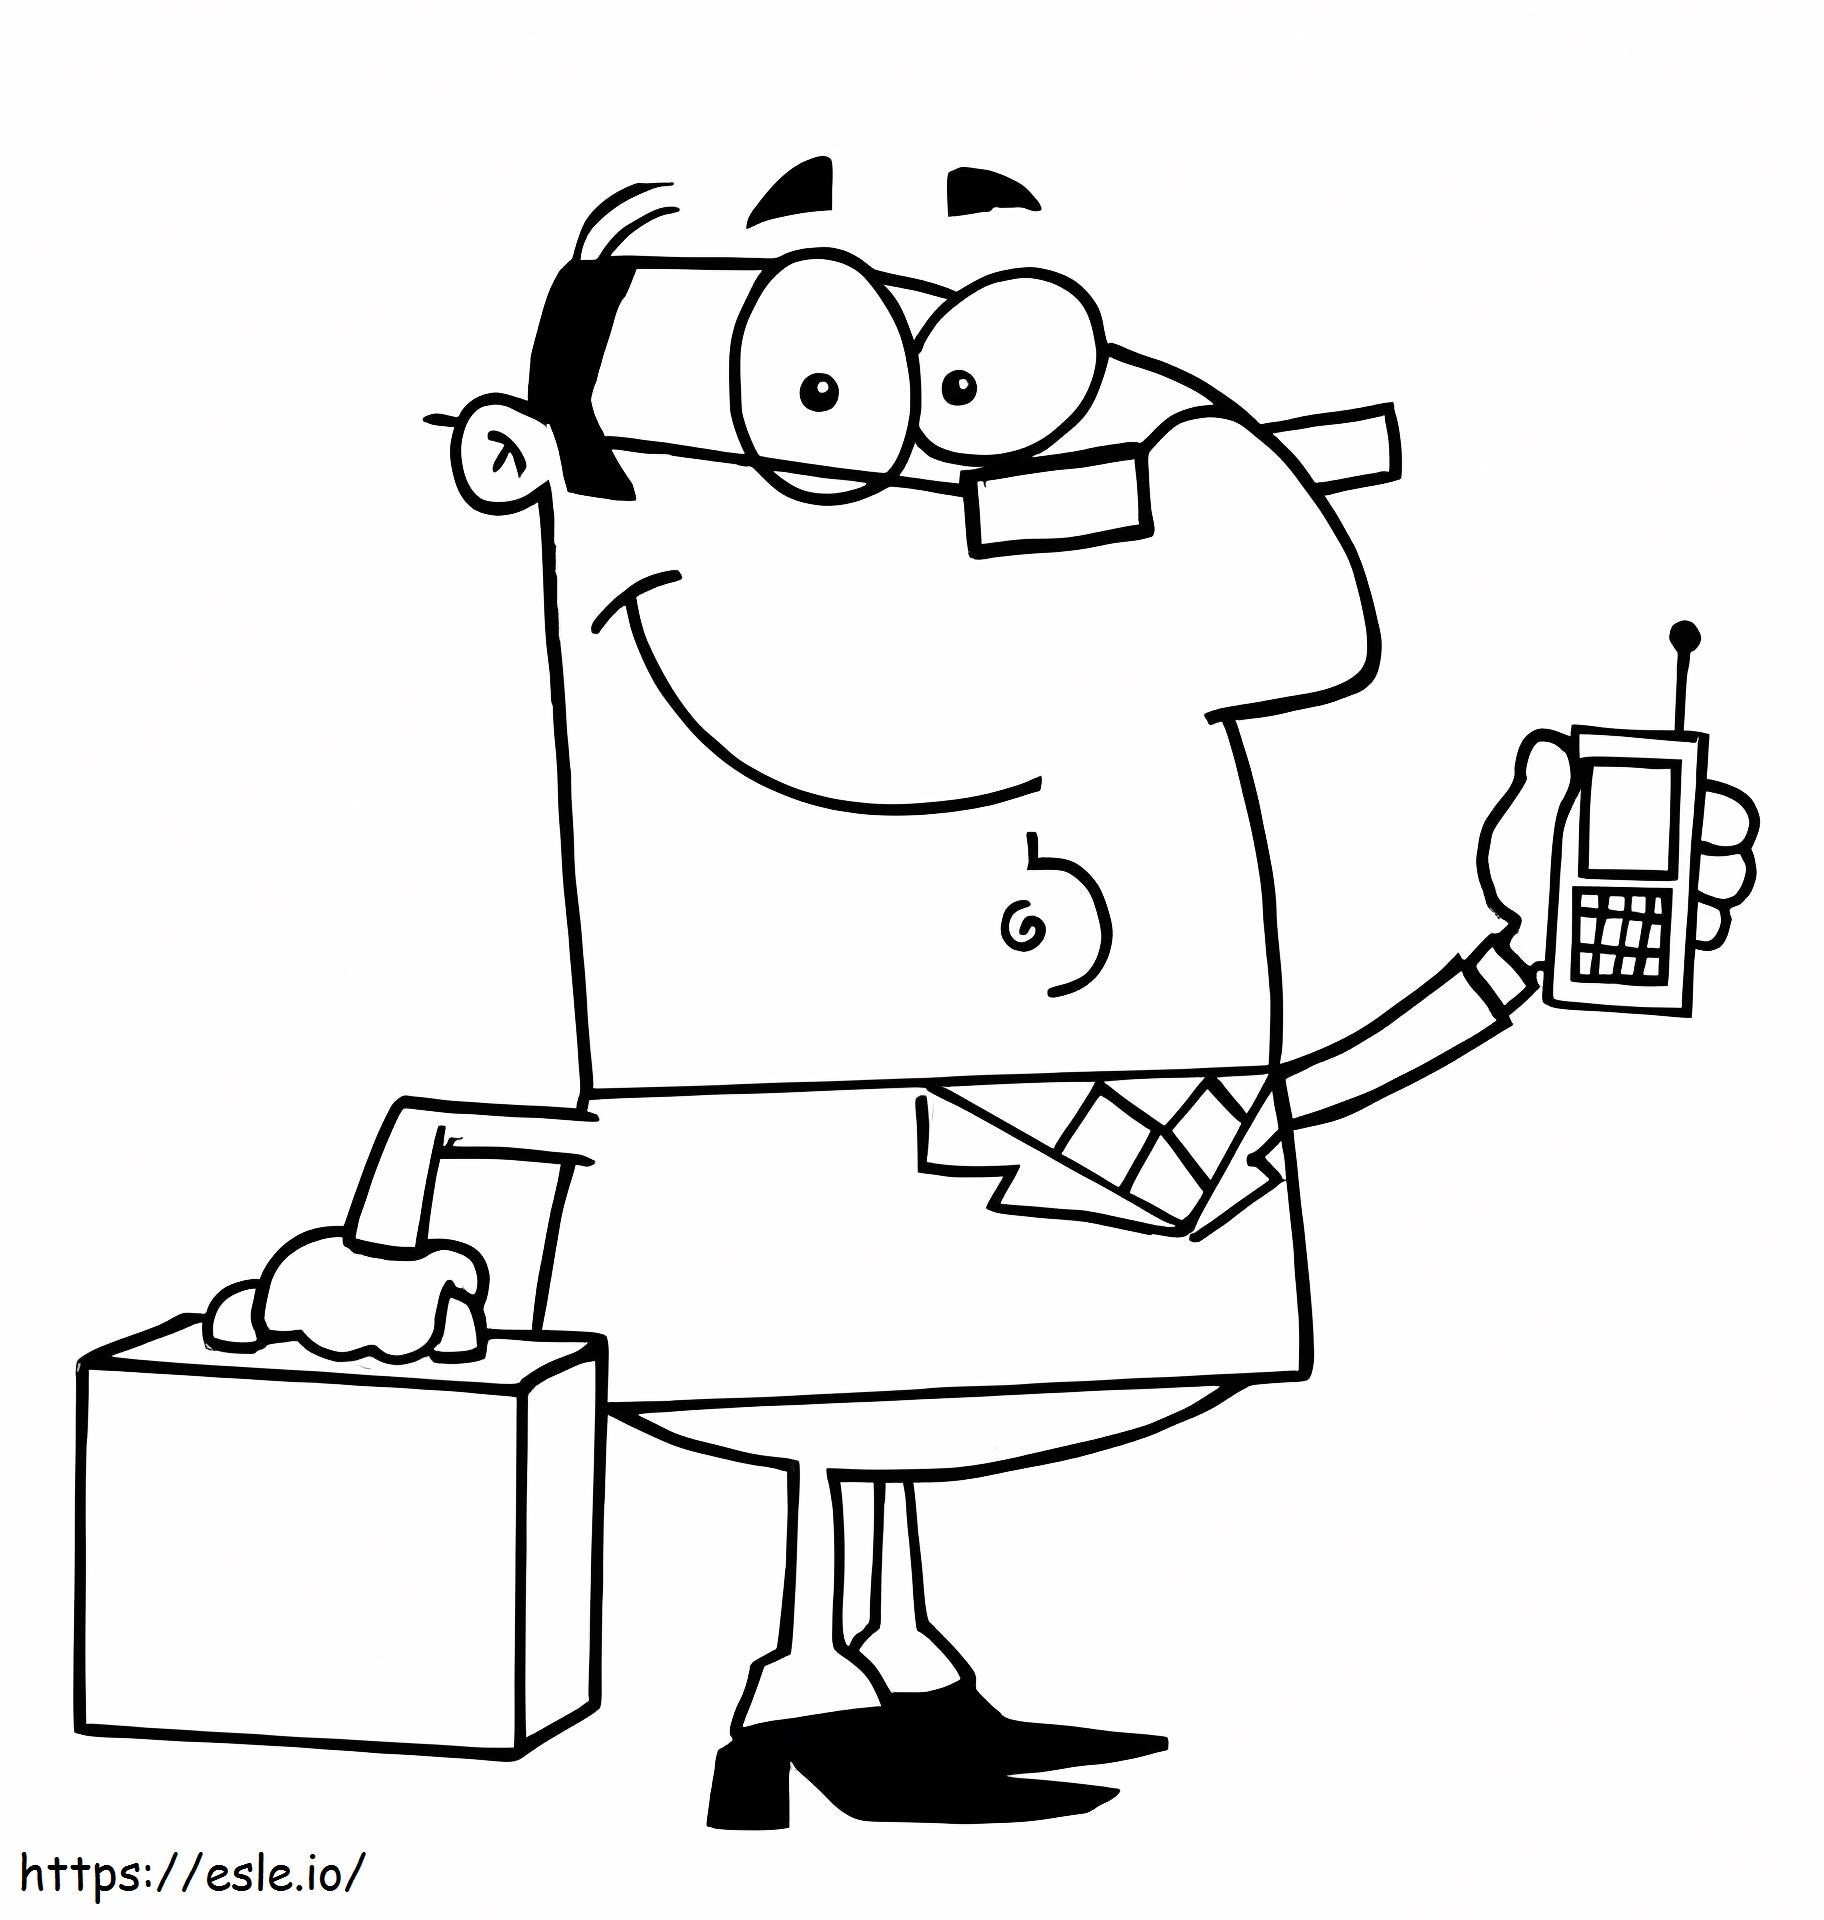 Businessman With A Cell Phone And Briefcase coloring page